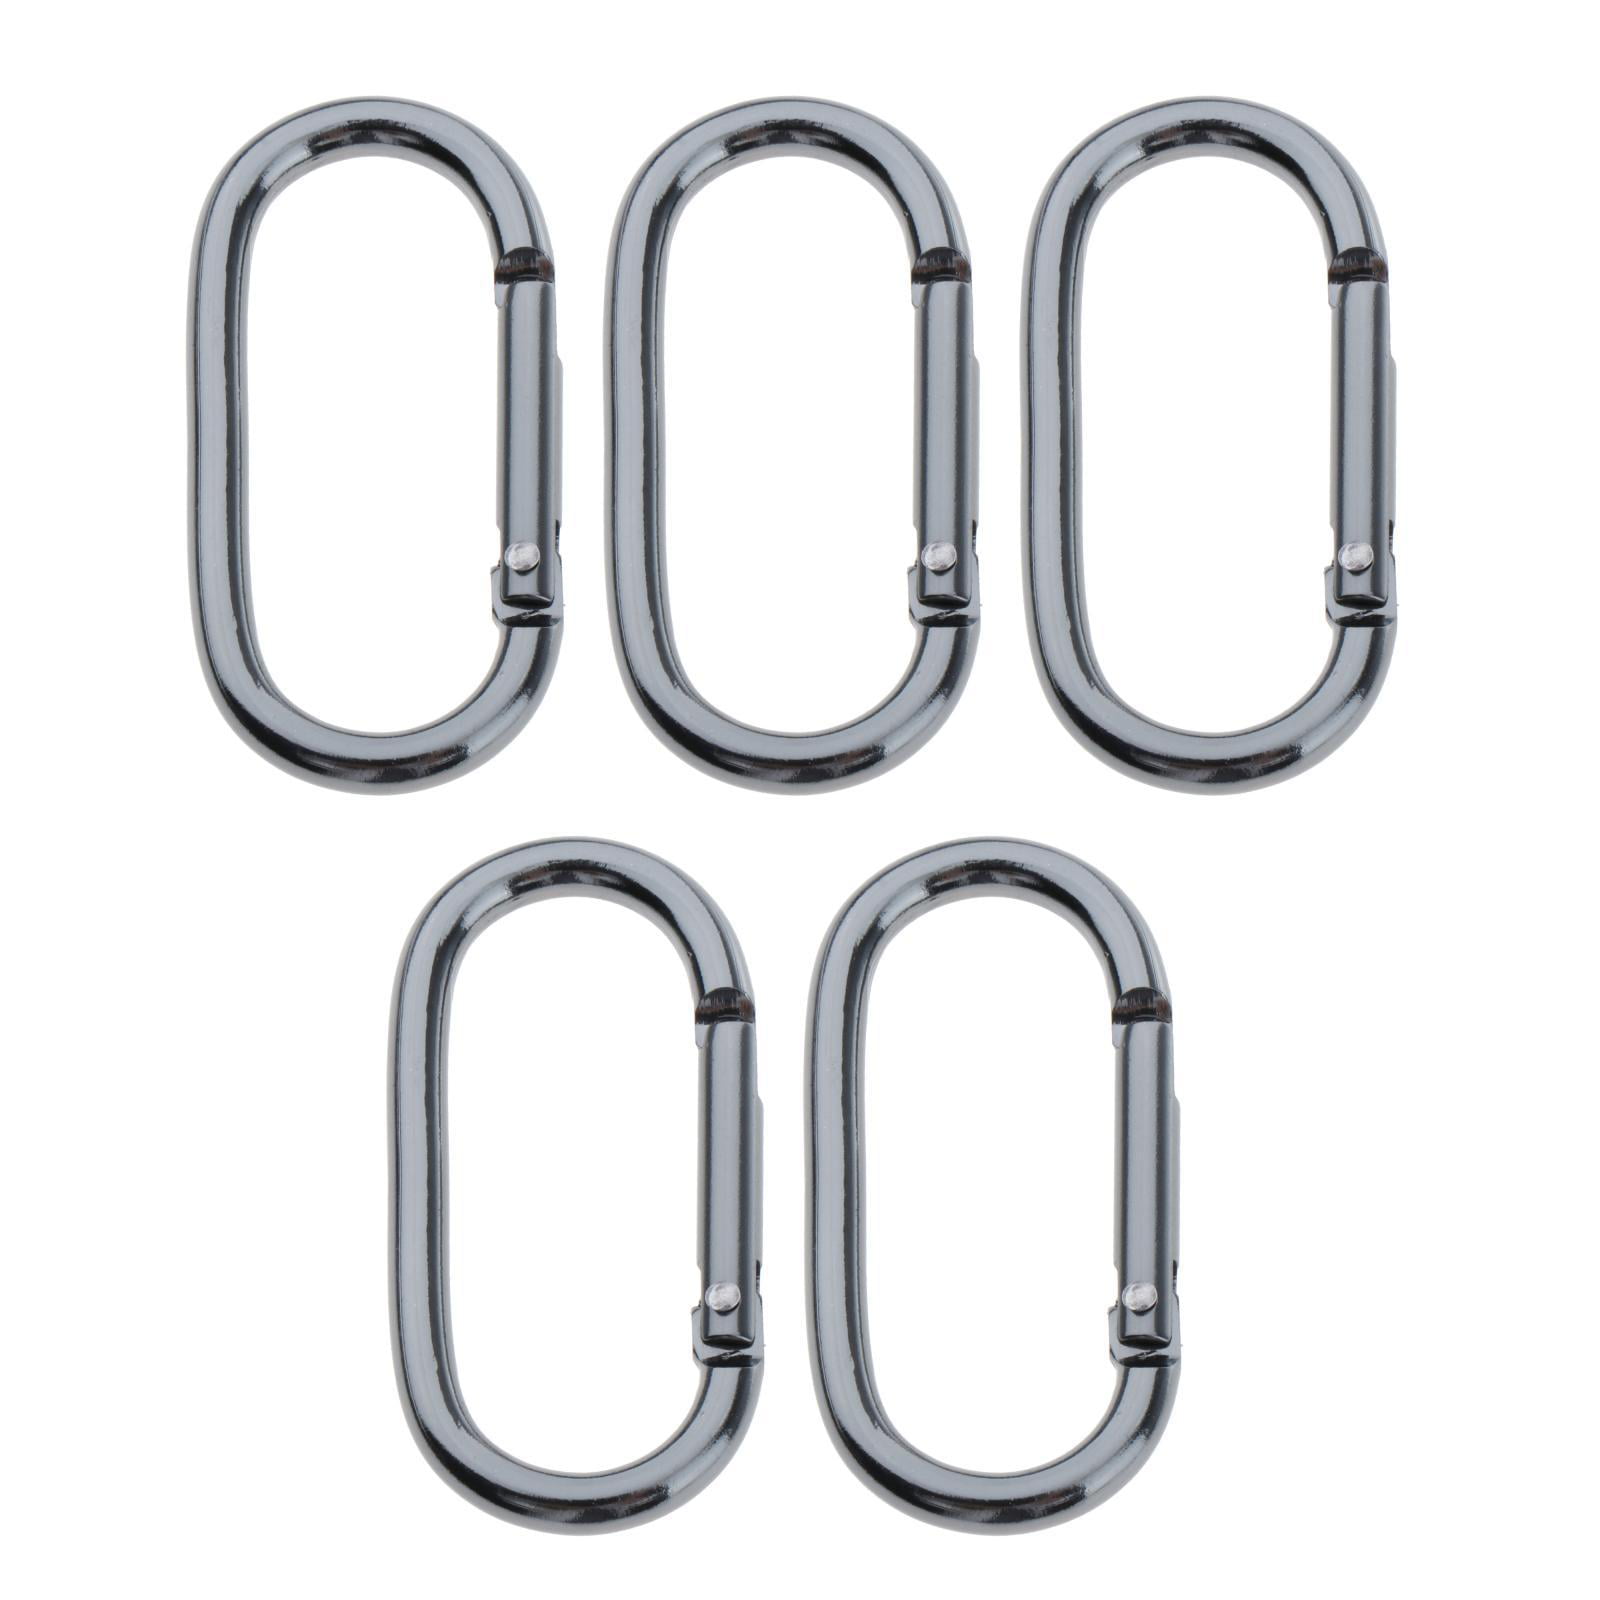 5xD-Ring Aluminum Carabiner Keyring Chain Snap Hook Clip Camping Keychain Useful 